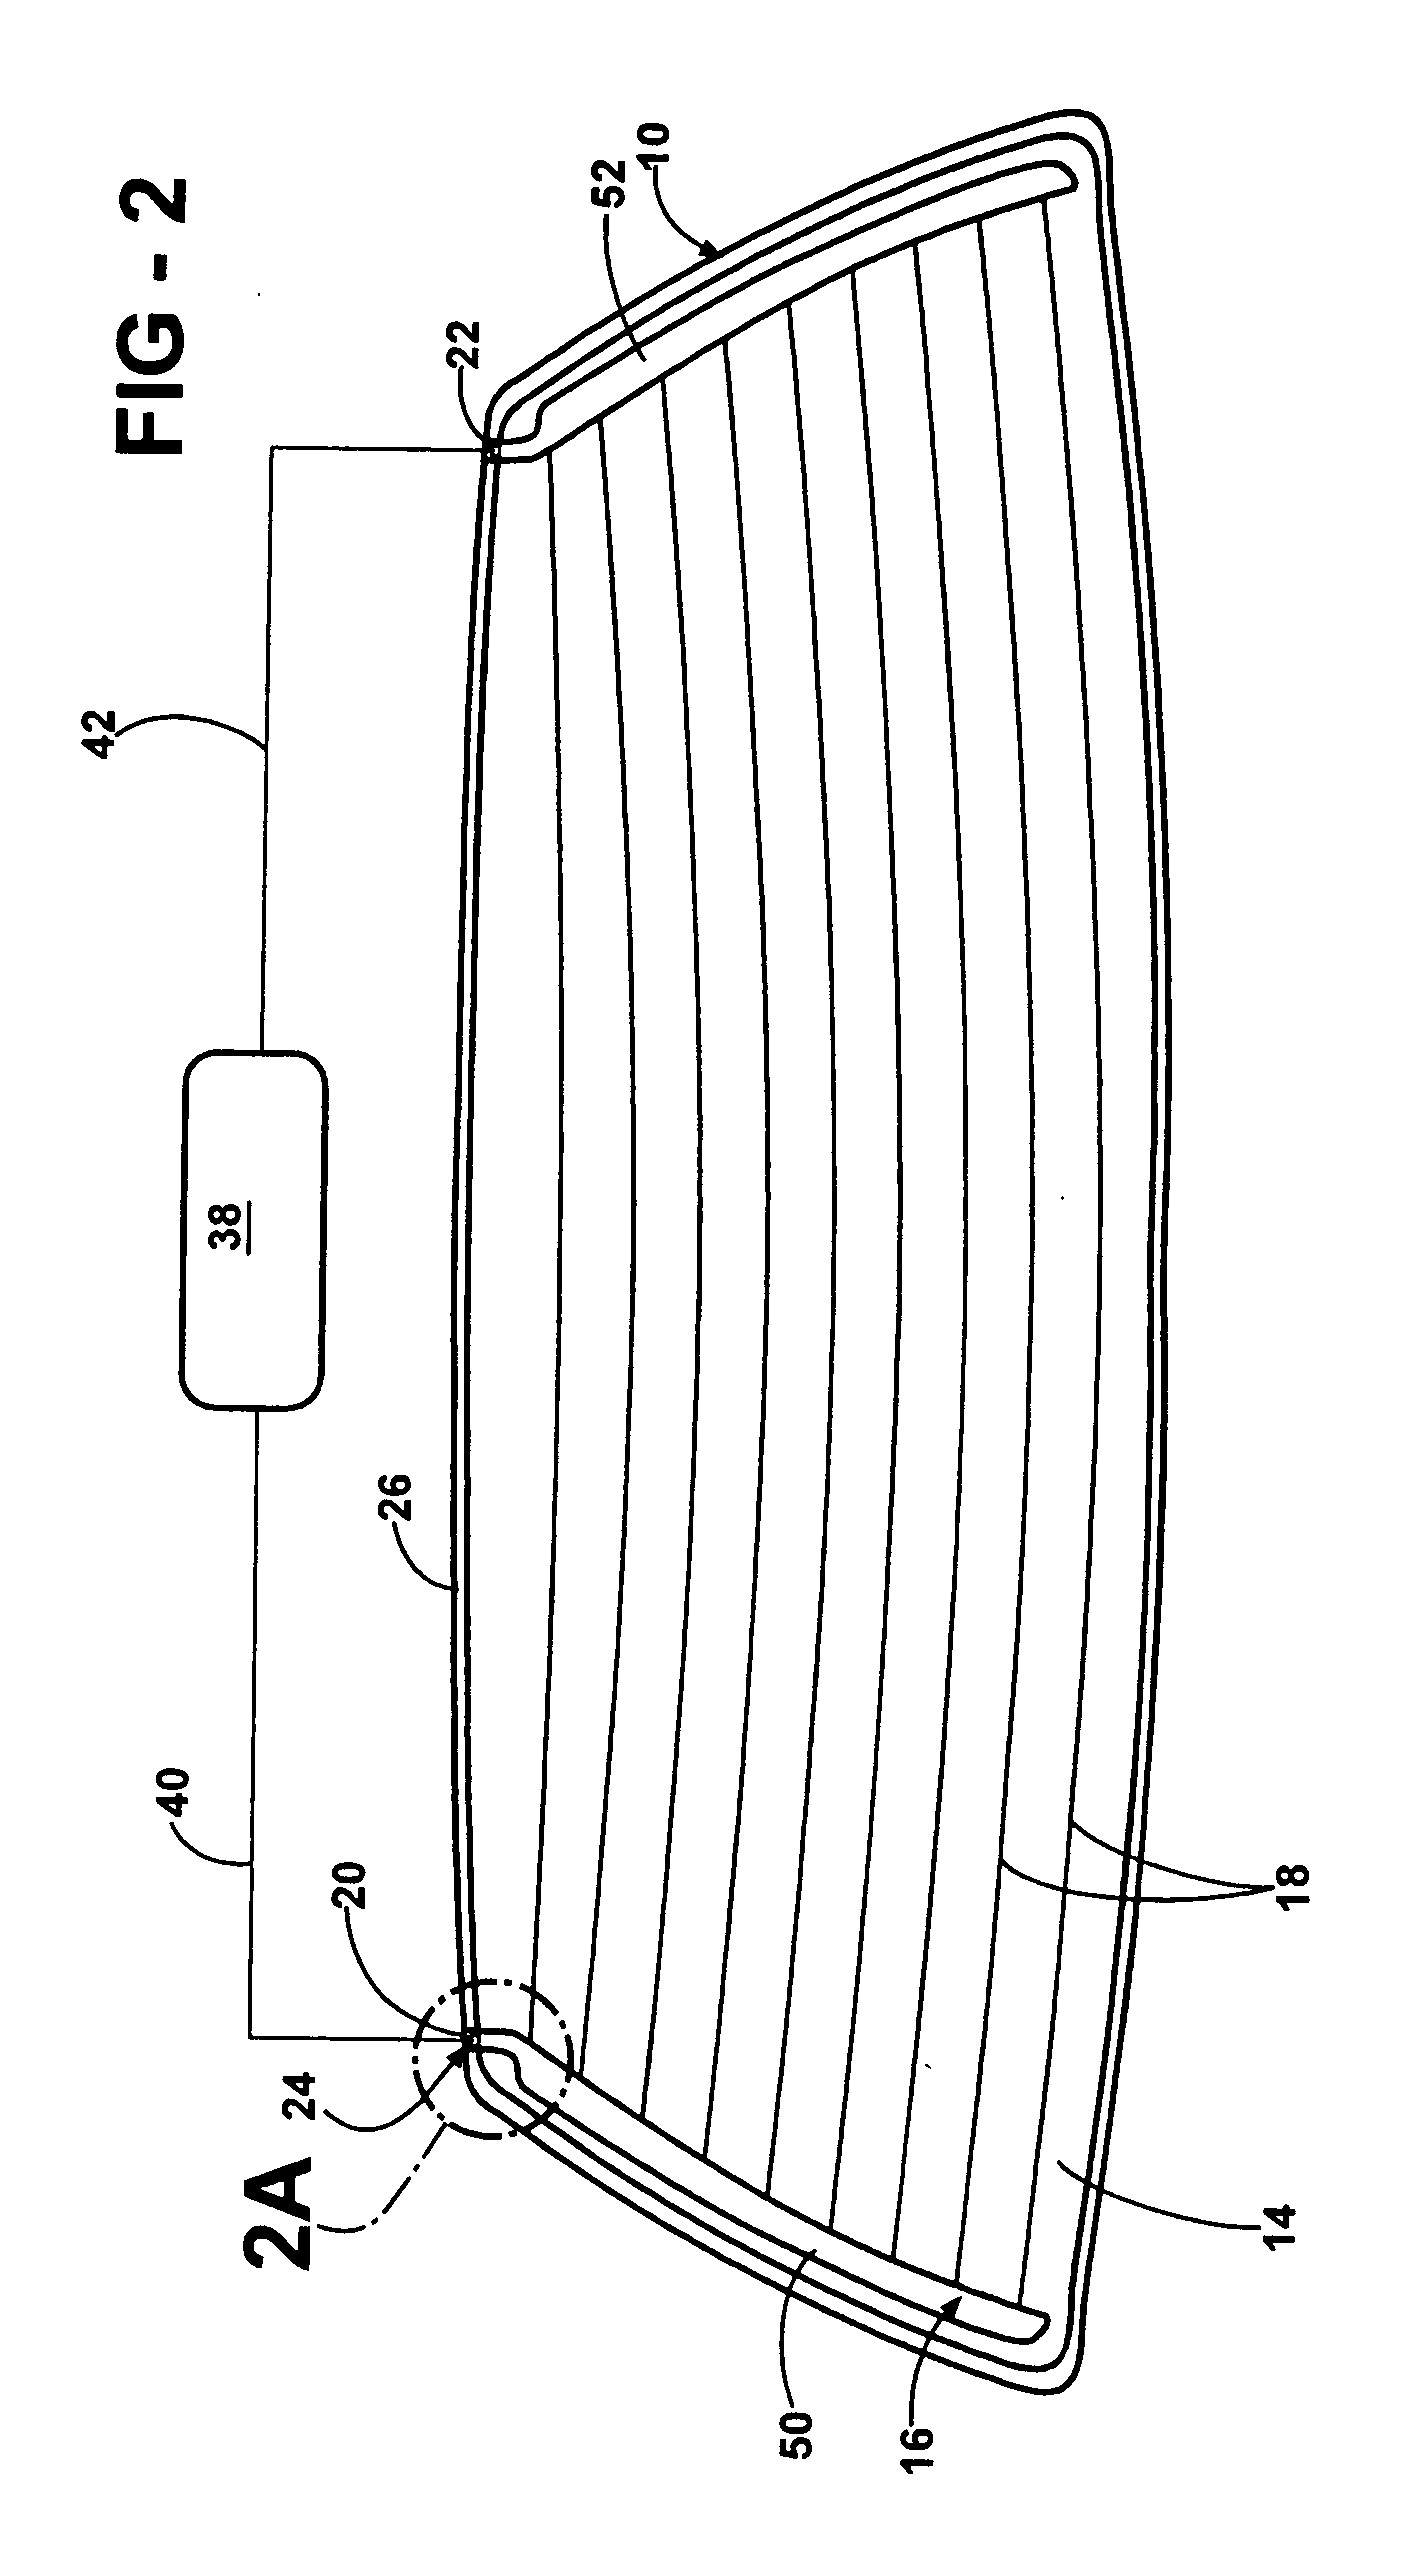 Electrical connector for a window pane of a vehicle